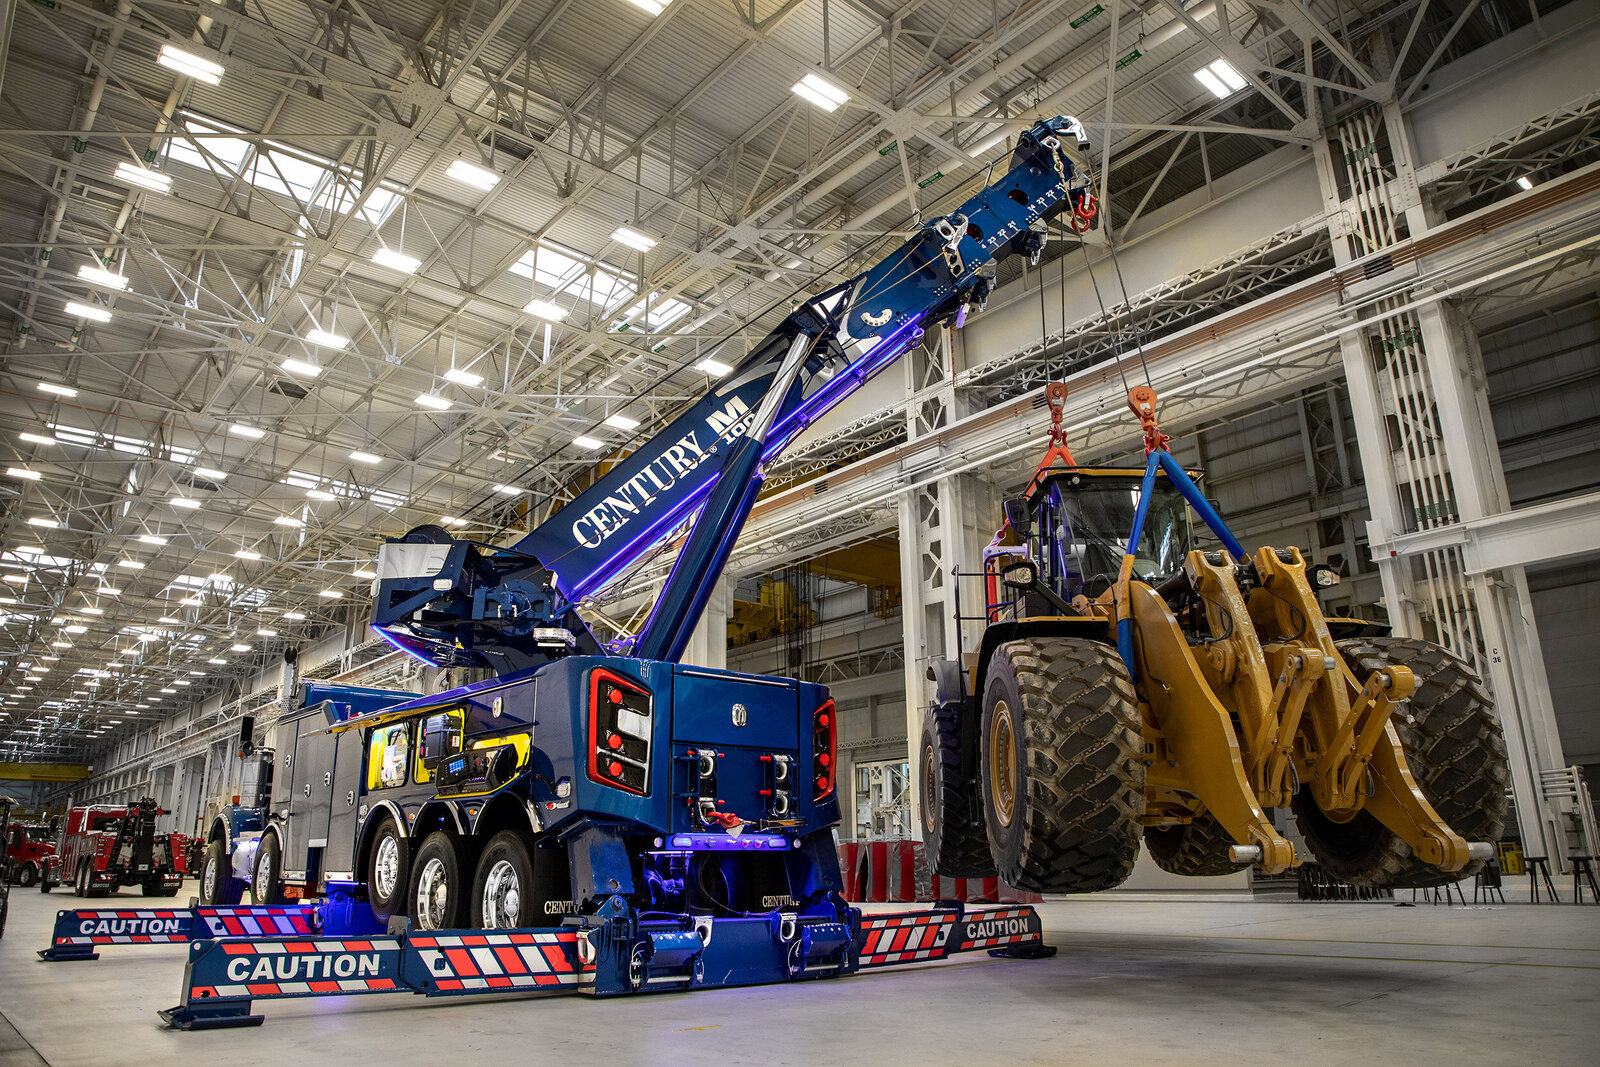 Petroff Towing takes delivery of the world's largest heavy-duty rotator tow truck 100 ton